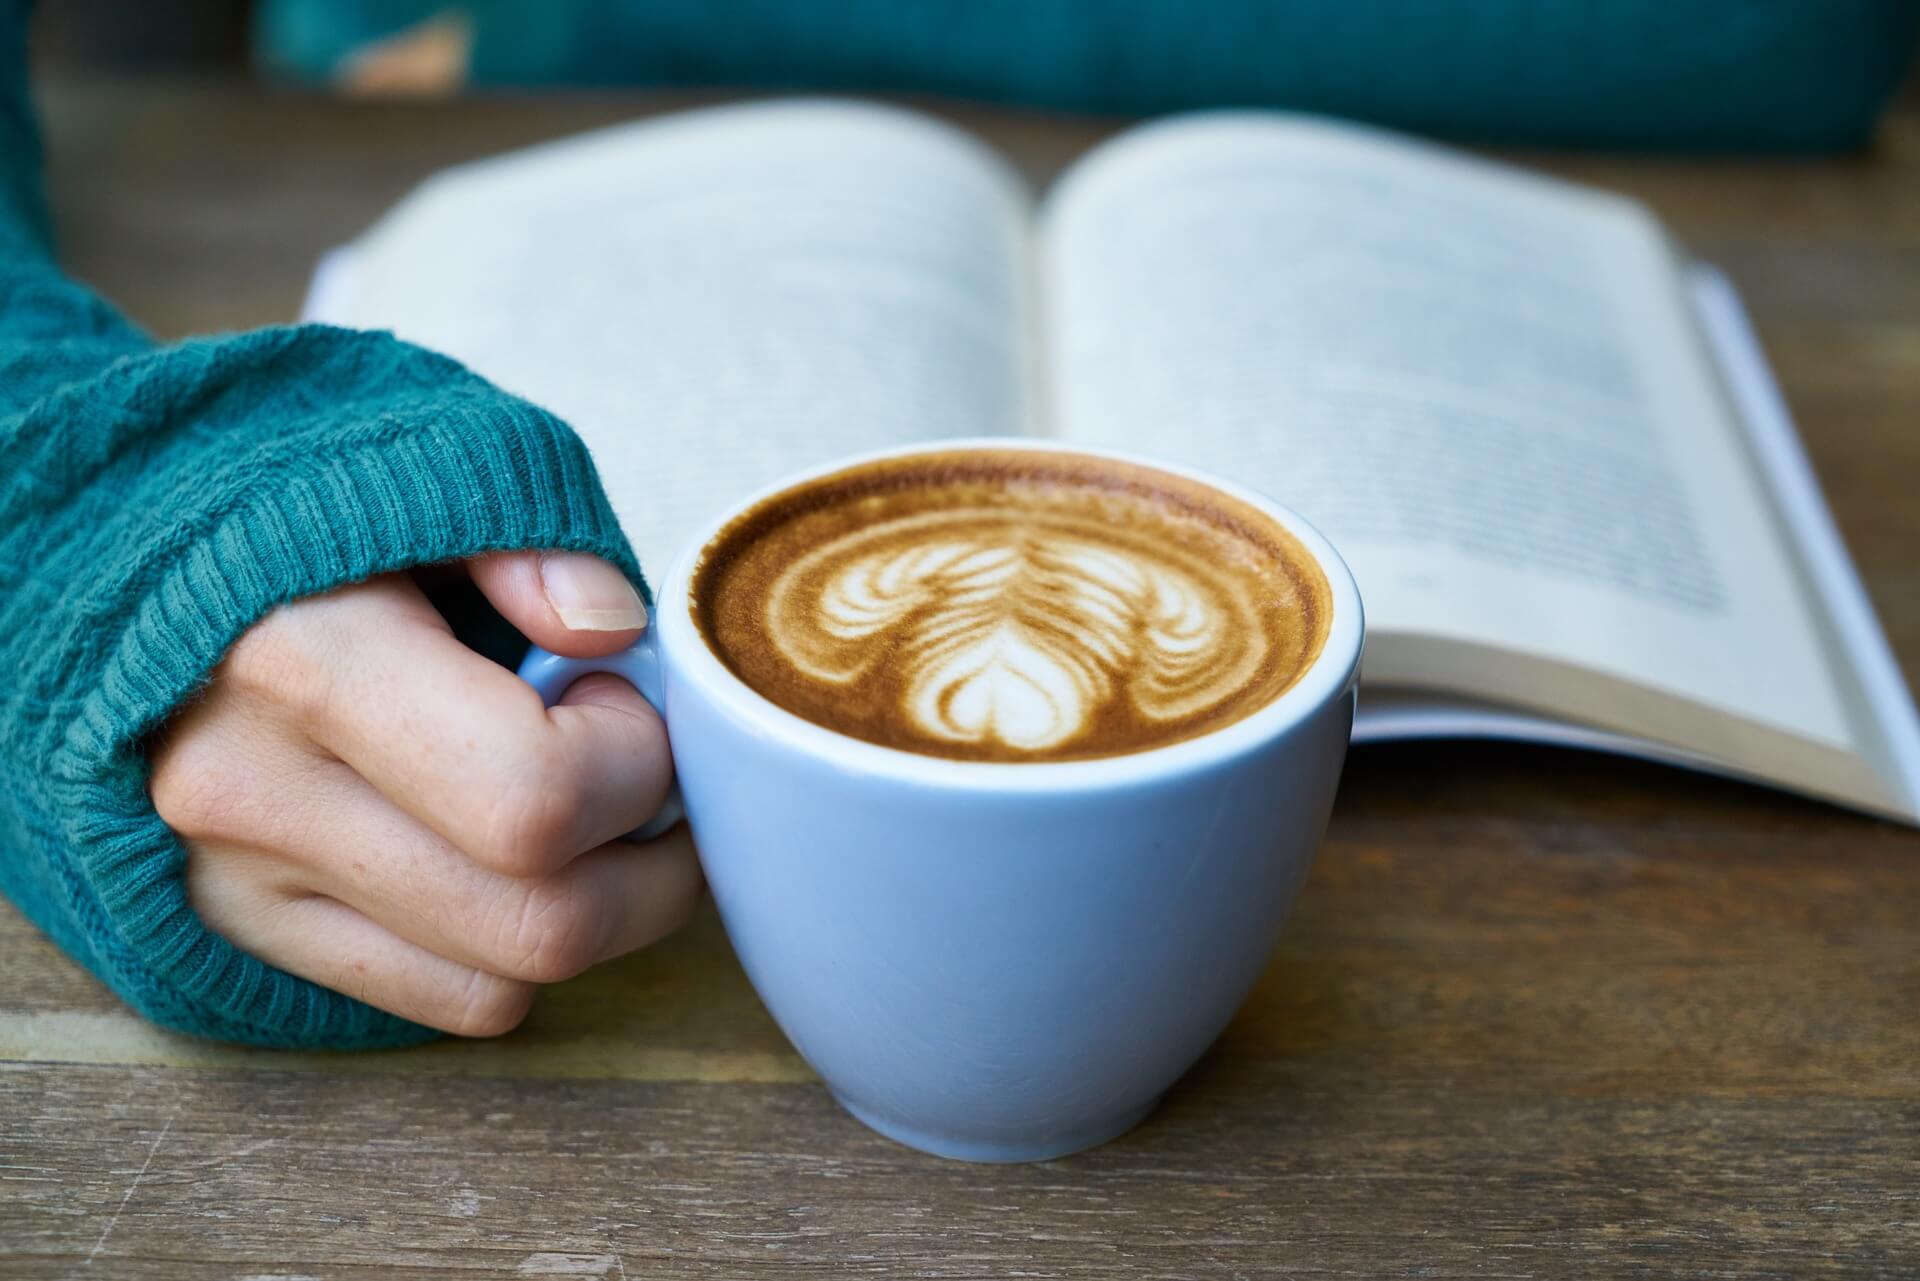 A hand holding a cup of coffee with a book on a table in the background.